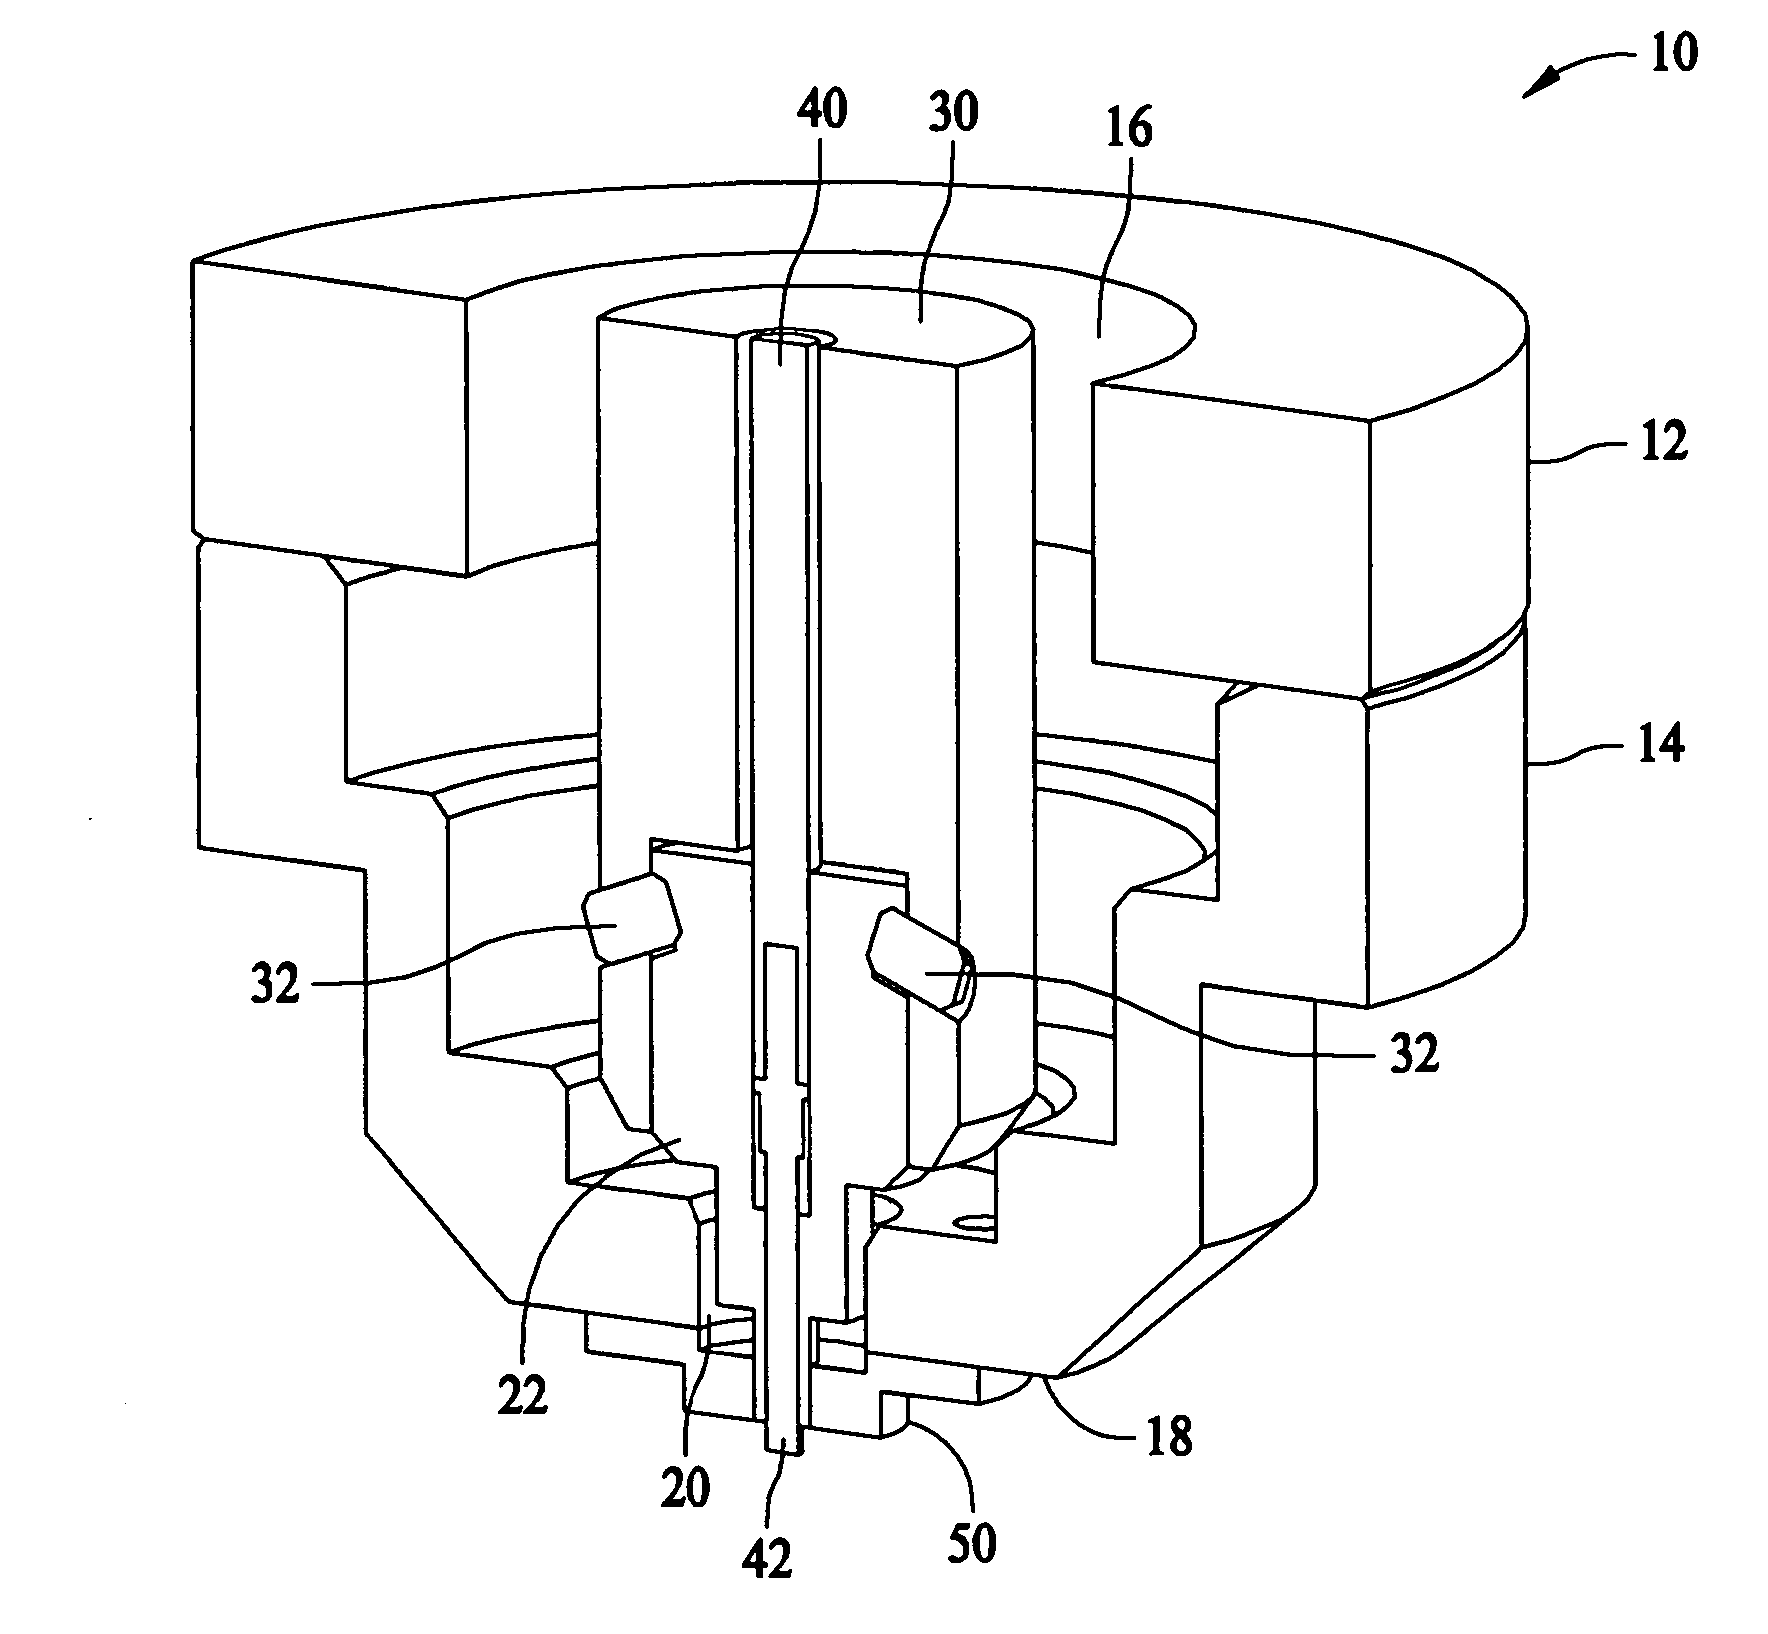 Methods and apparatus for retractable pin friction stir welding and spot welding